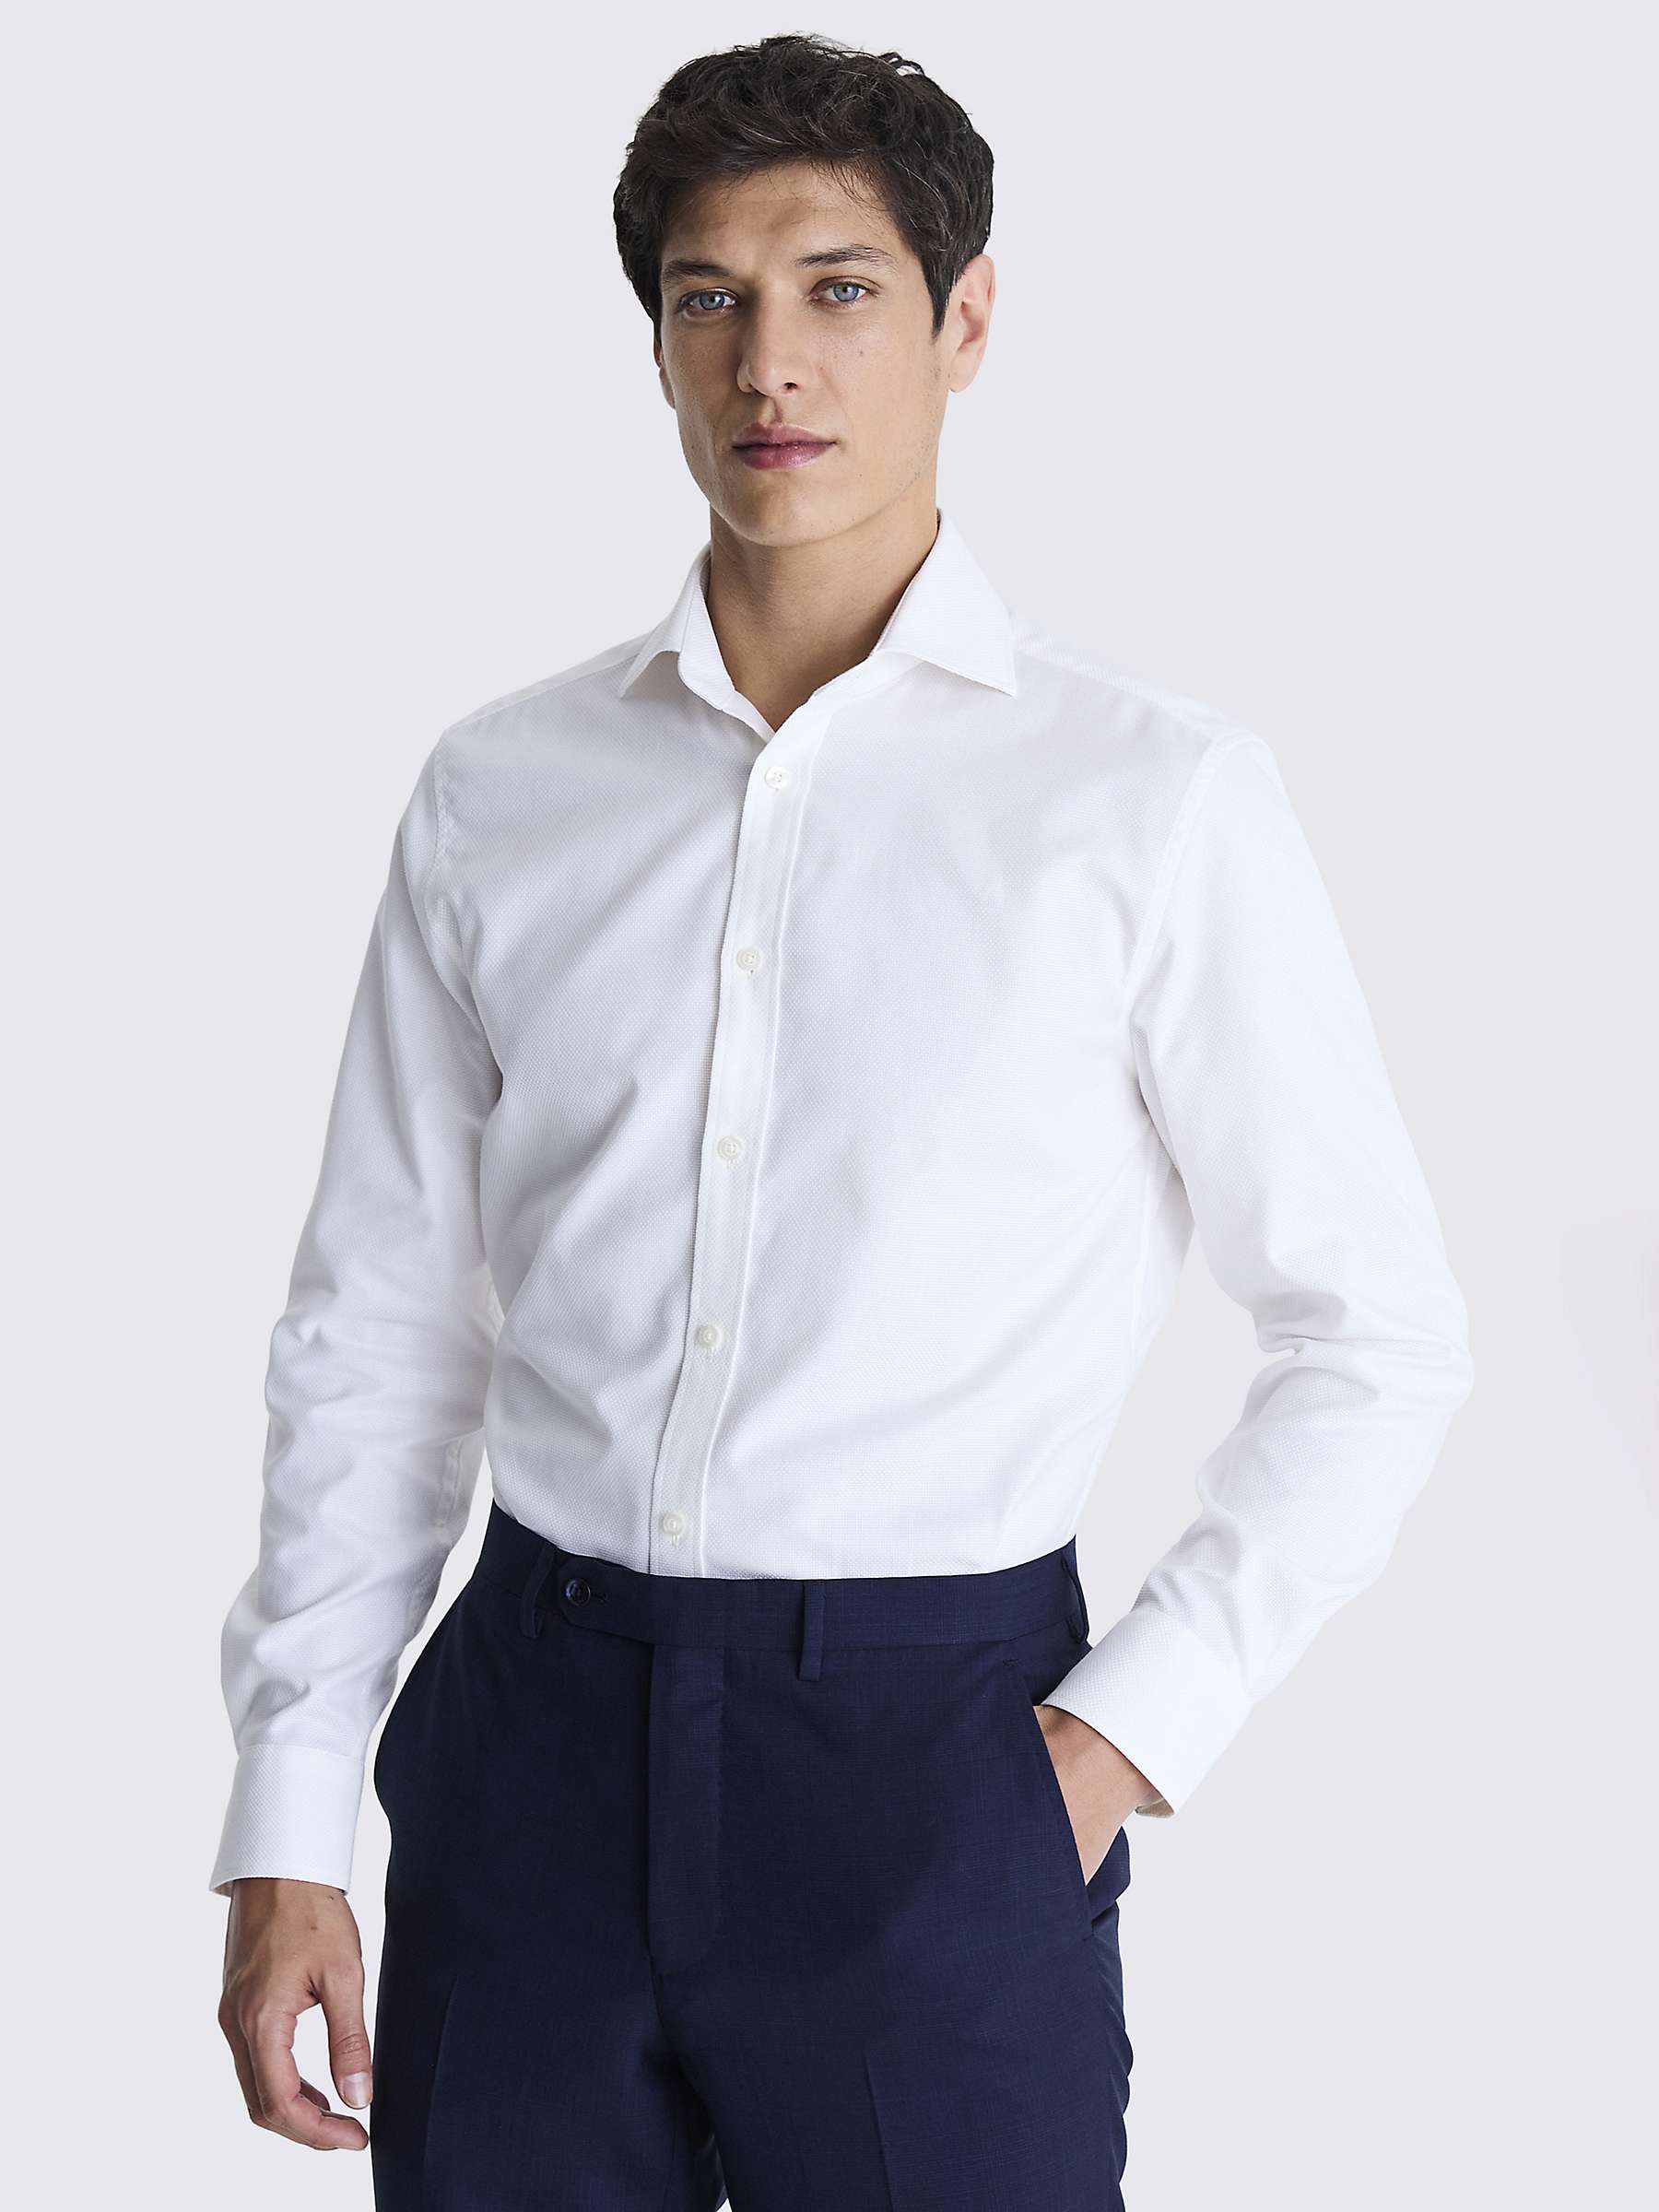 Buy Moss Tailored Single Cuff Cotton Dobby Shirt Online at johnlewis.com